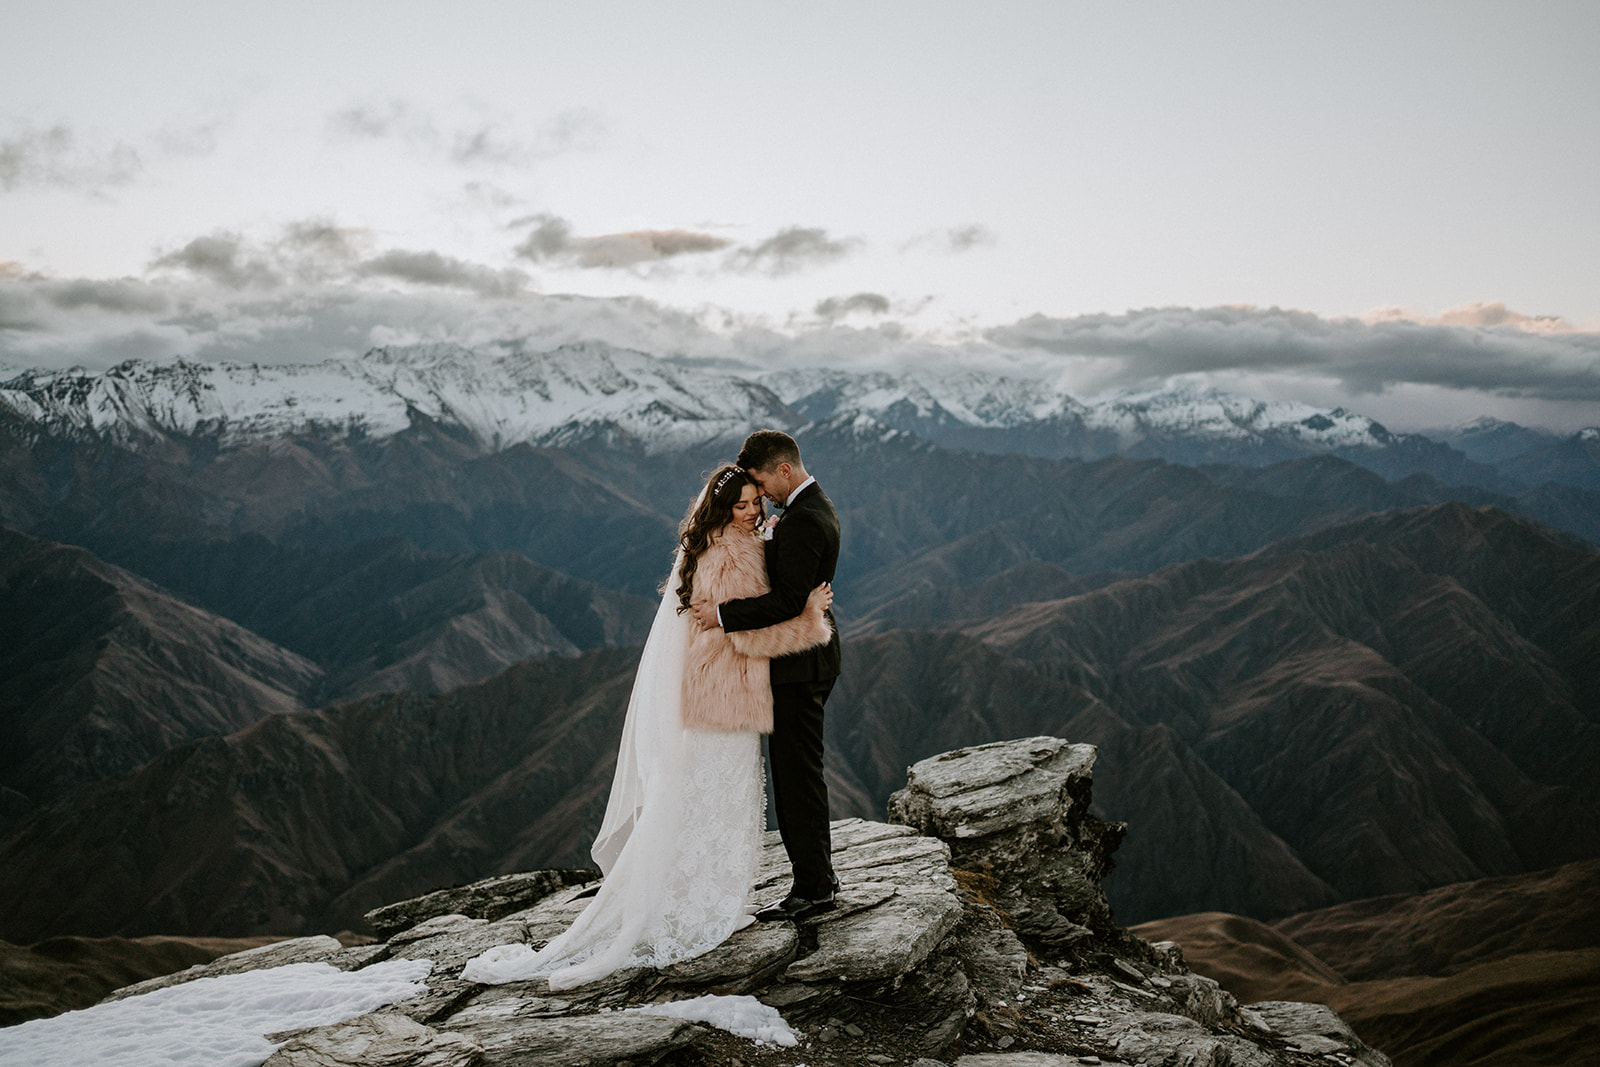 Newly wed couple high above the mountain hugging, with snow capped hills in the background.